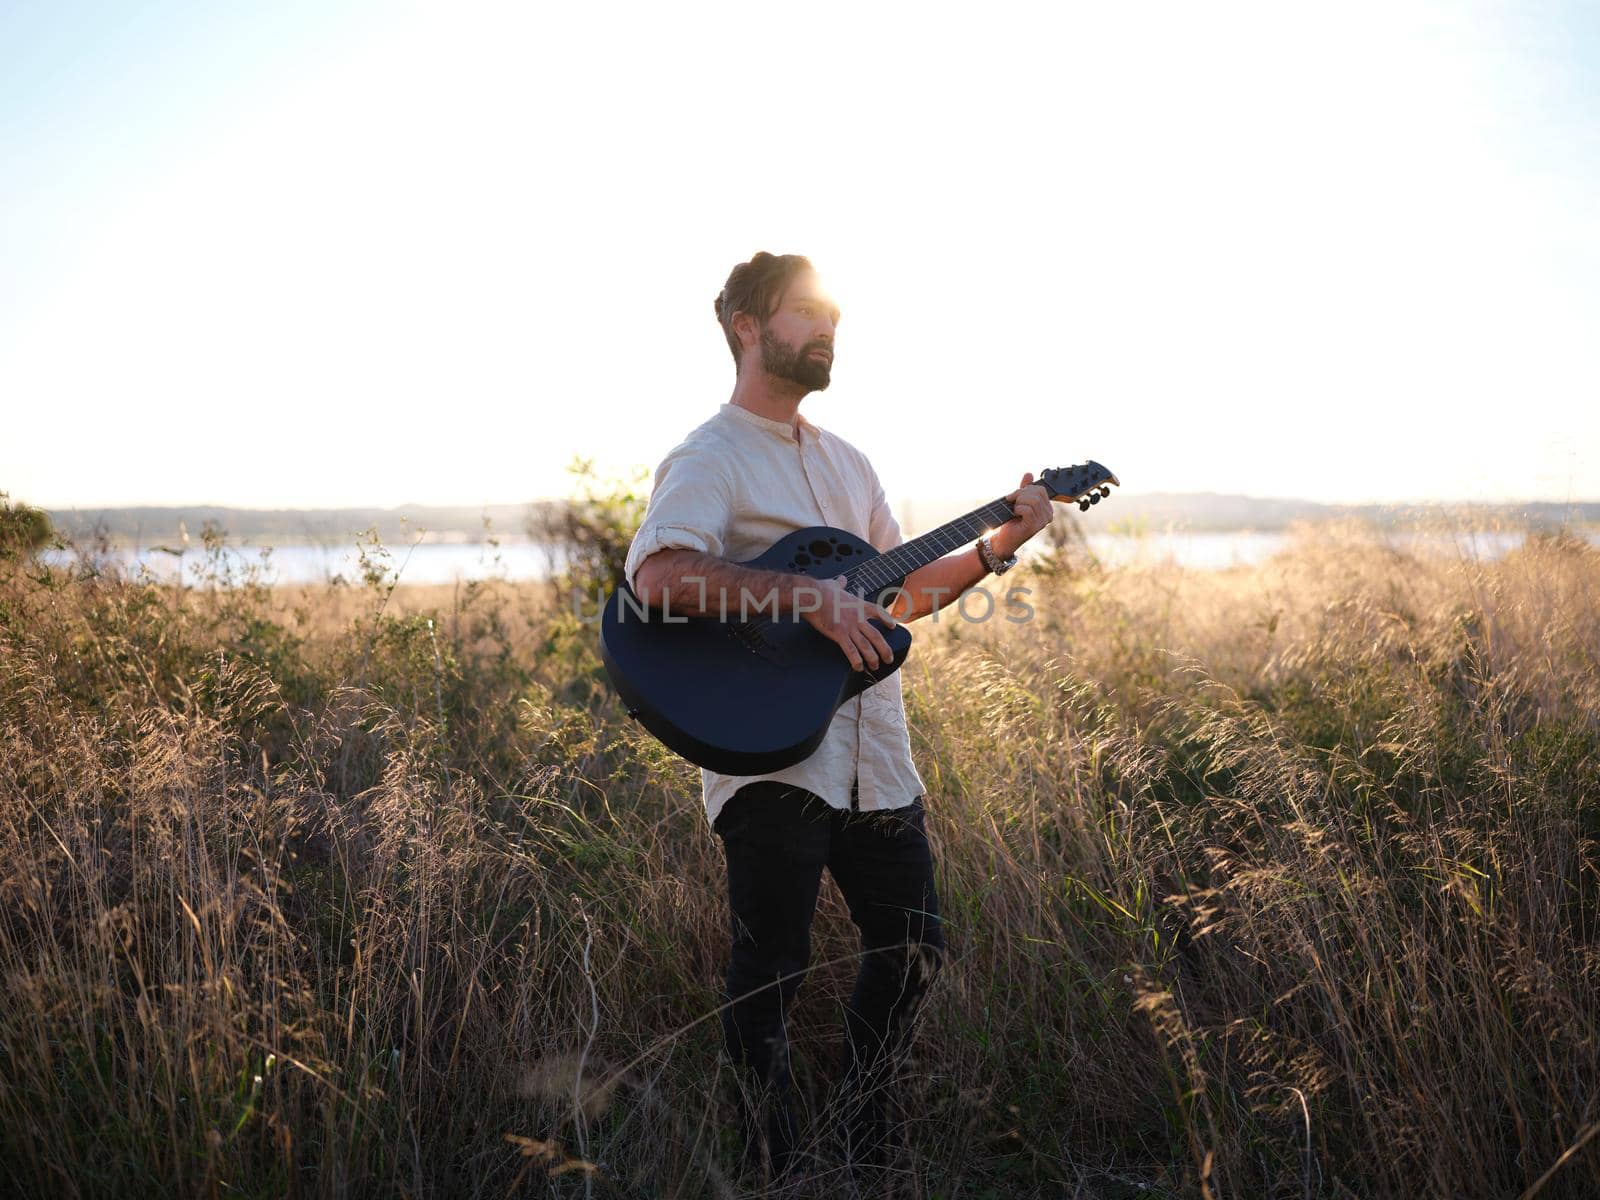 guitarist posing with his guitar in the countryside during sunset, horizontal portrait